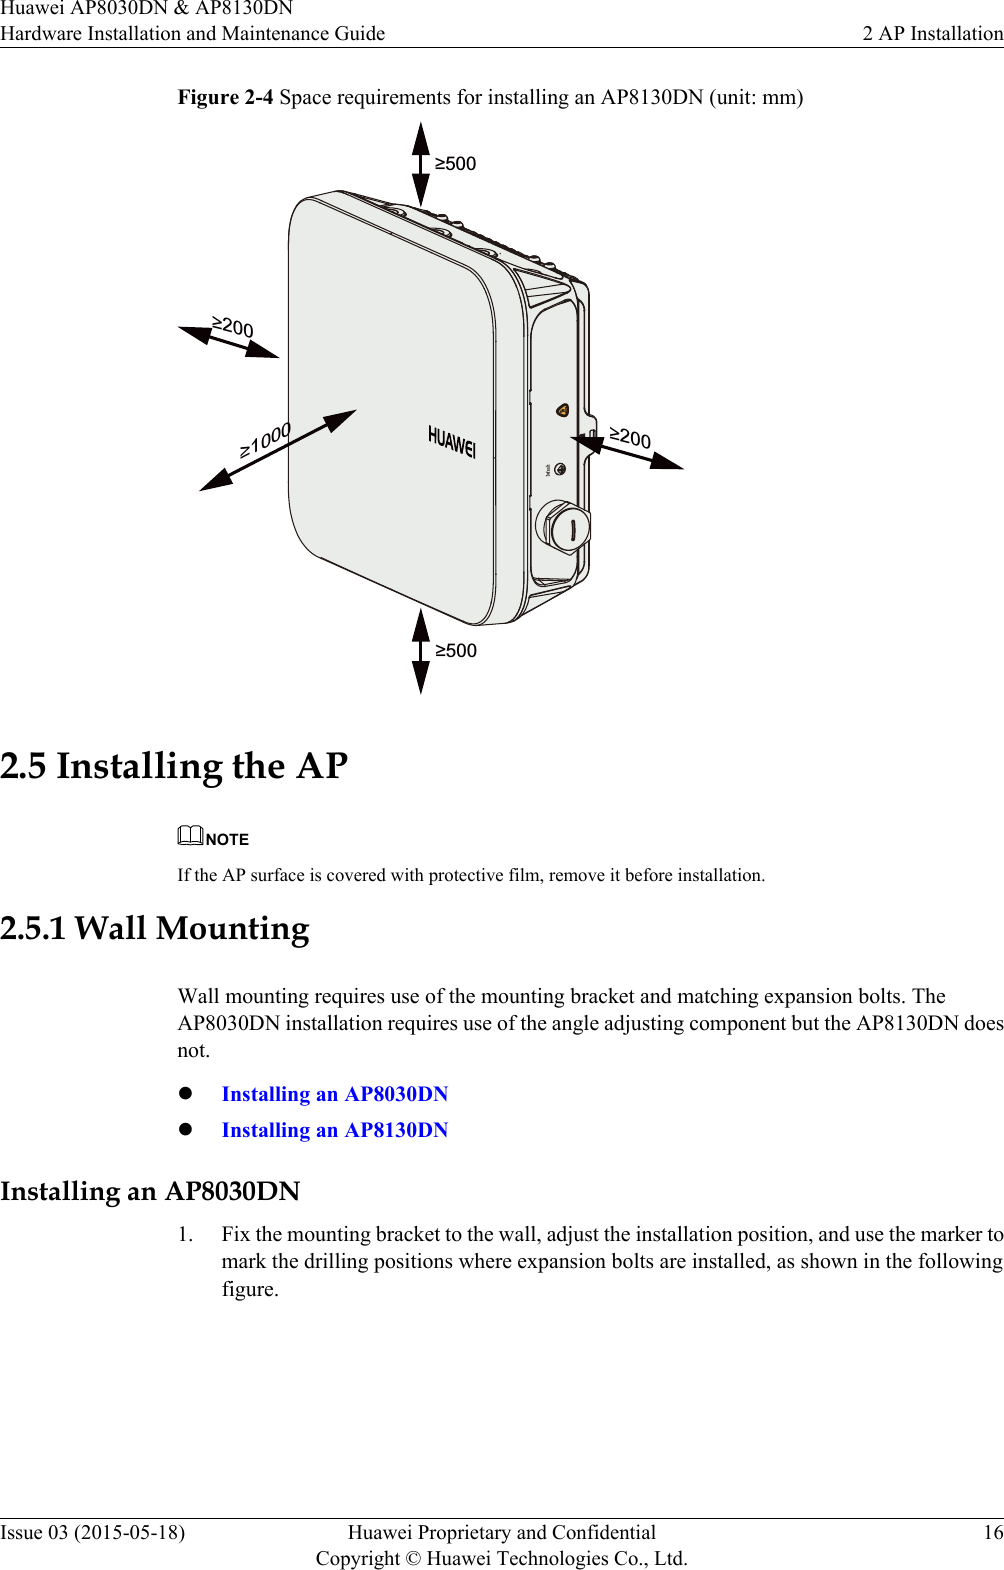 Figure 2-4 Space requirements for installing an AP8130DN (unit: mm)&apos;HIDXOW≥500≥1000≥500≥200≥2002.5 Installing the APNOTEIf the AP surface is covered with protective film, remove it before installation.2.5.1 Wall MountingWall mounting requires use of the mounting bracket and matching expansion bolts. TheAP8030DN installation requires use of the angle adjusting component but the AP8130DN doesnot.lInstalling an AP8030DNlInstalling an AP8130DNInstalling an AP8030DN1. Fix the mounting bracket to the wall, adjust the installation position, and use the marker tomark the drilling positions where expansion bolts are installed, as shown in the followingfigure.Huawei AP8030DN &amp; AP8130DNHardware Installation and Maintenance Guide 2 AP InstallationIssue 03 (2015-05-18) Huawei Proprietary and ConfidentialCopyright © Huawei Technologies Co., Ltd.16